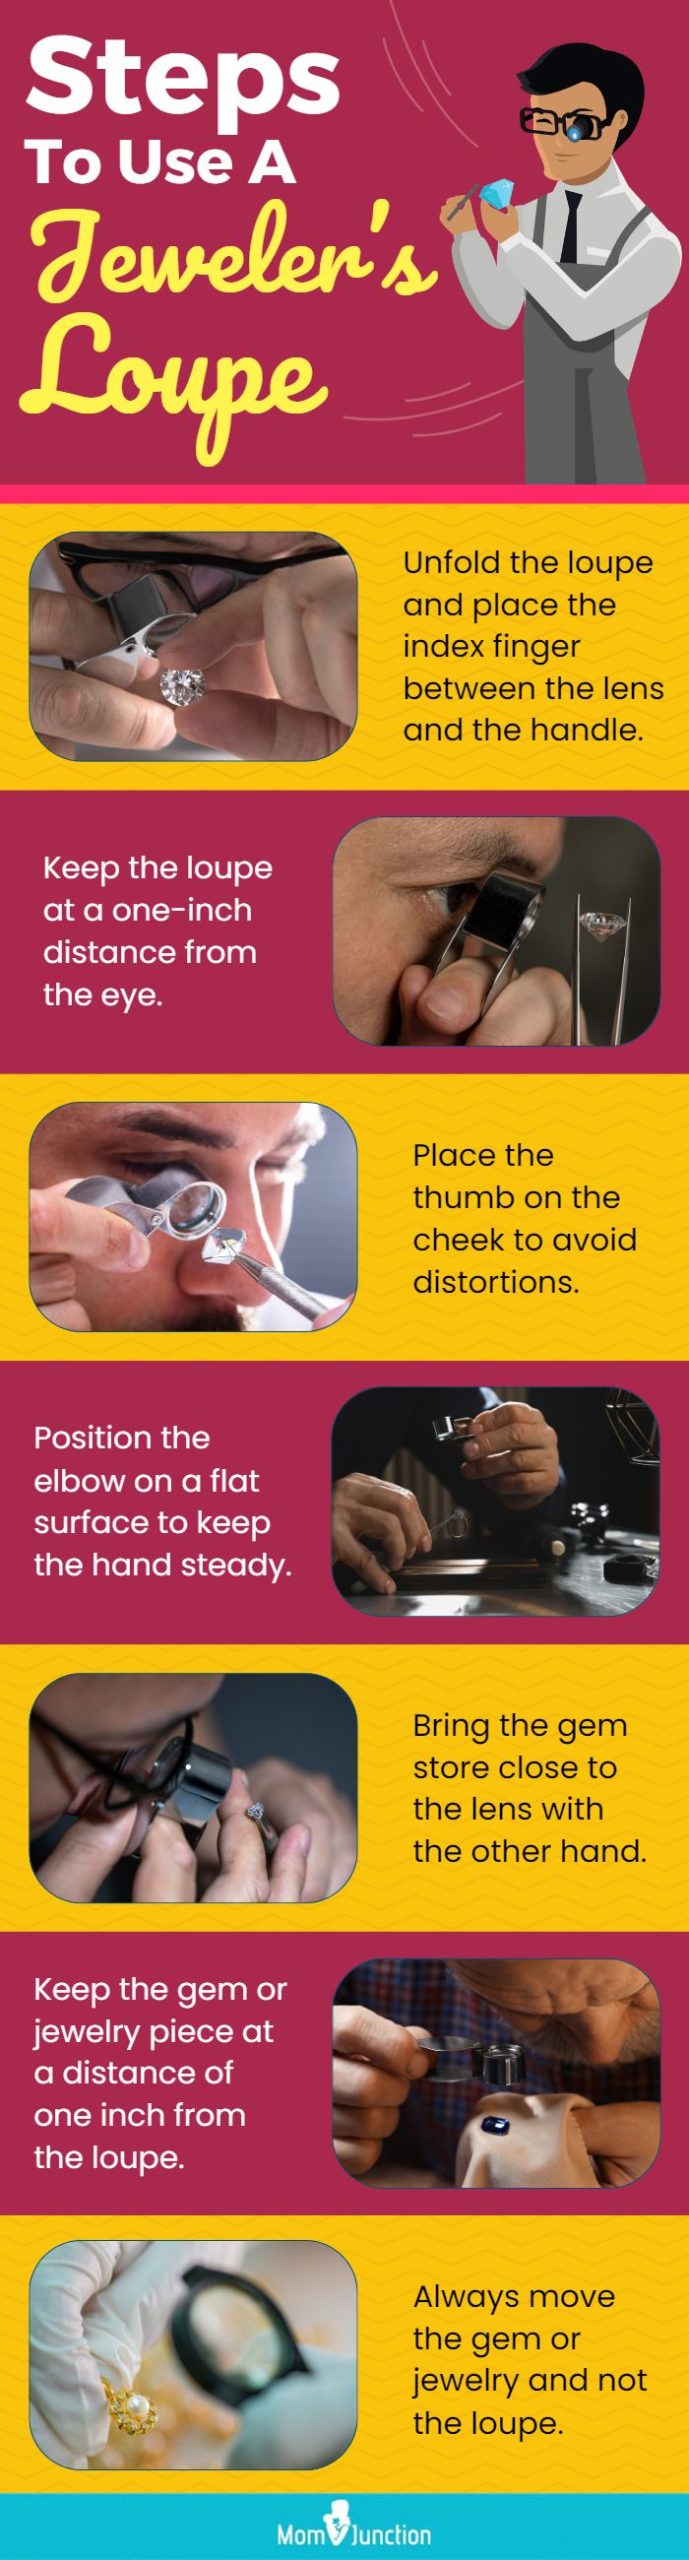 Steps To Use A Jeweler’s Loupe (infographic)